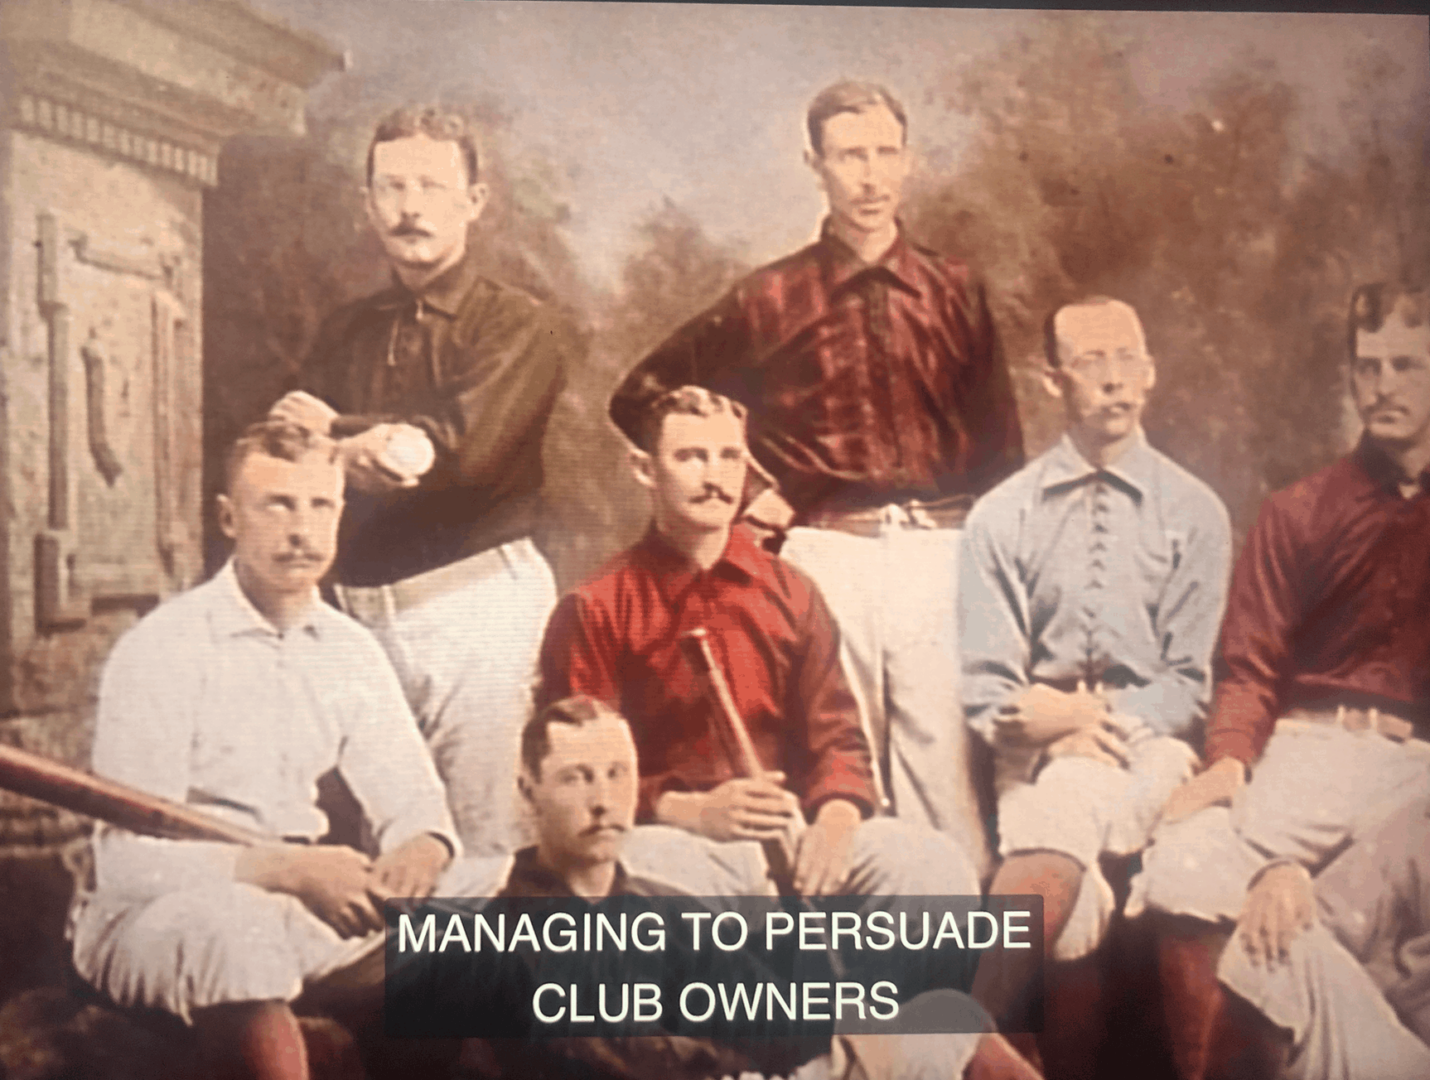 Managing to persuade club owners